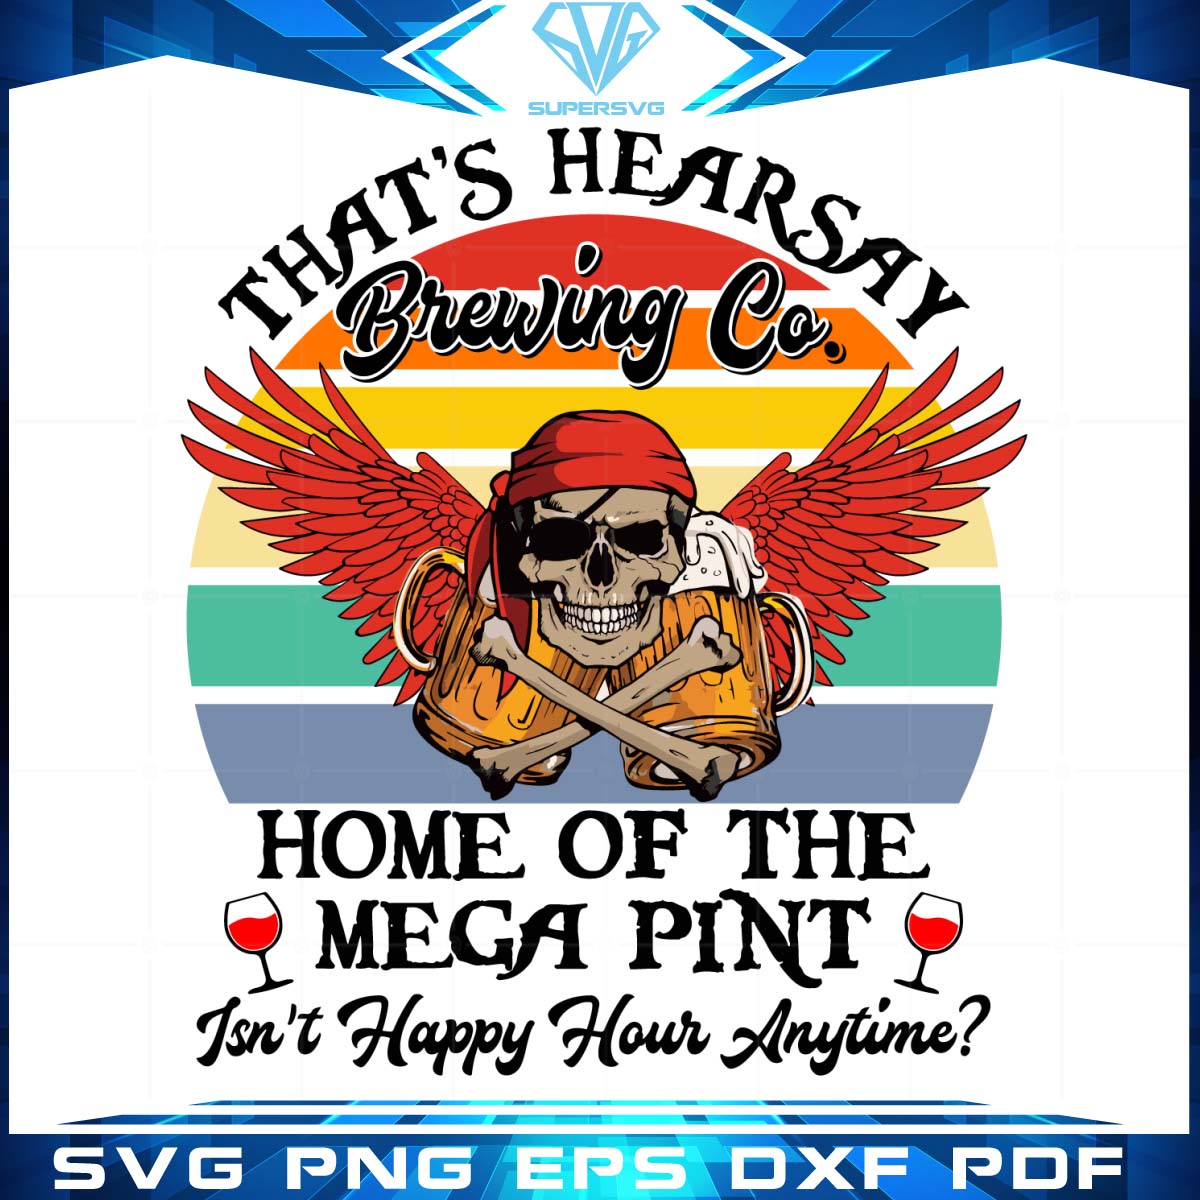 Thats Hearsay Brewing Co Home Of The Mega Pint Svg, Trending Svg